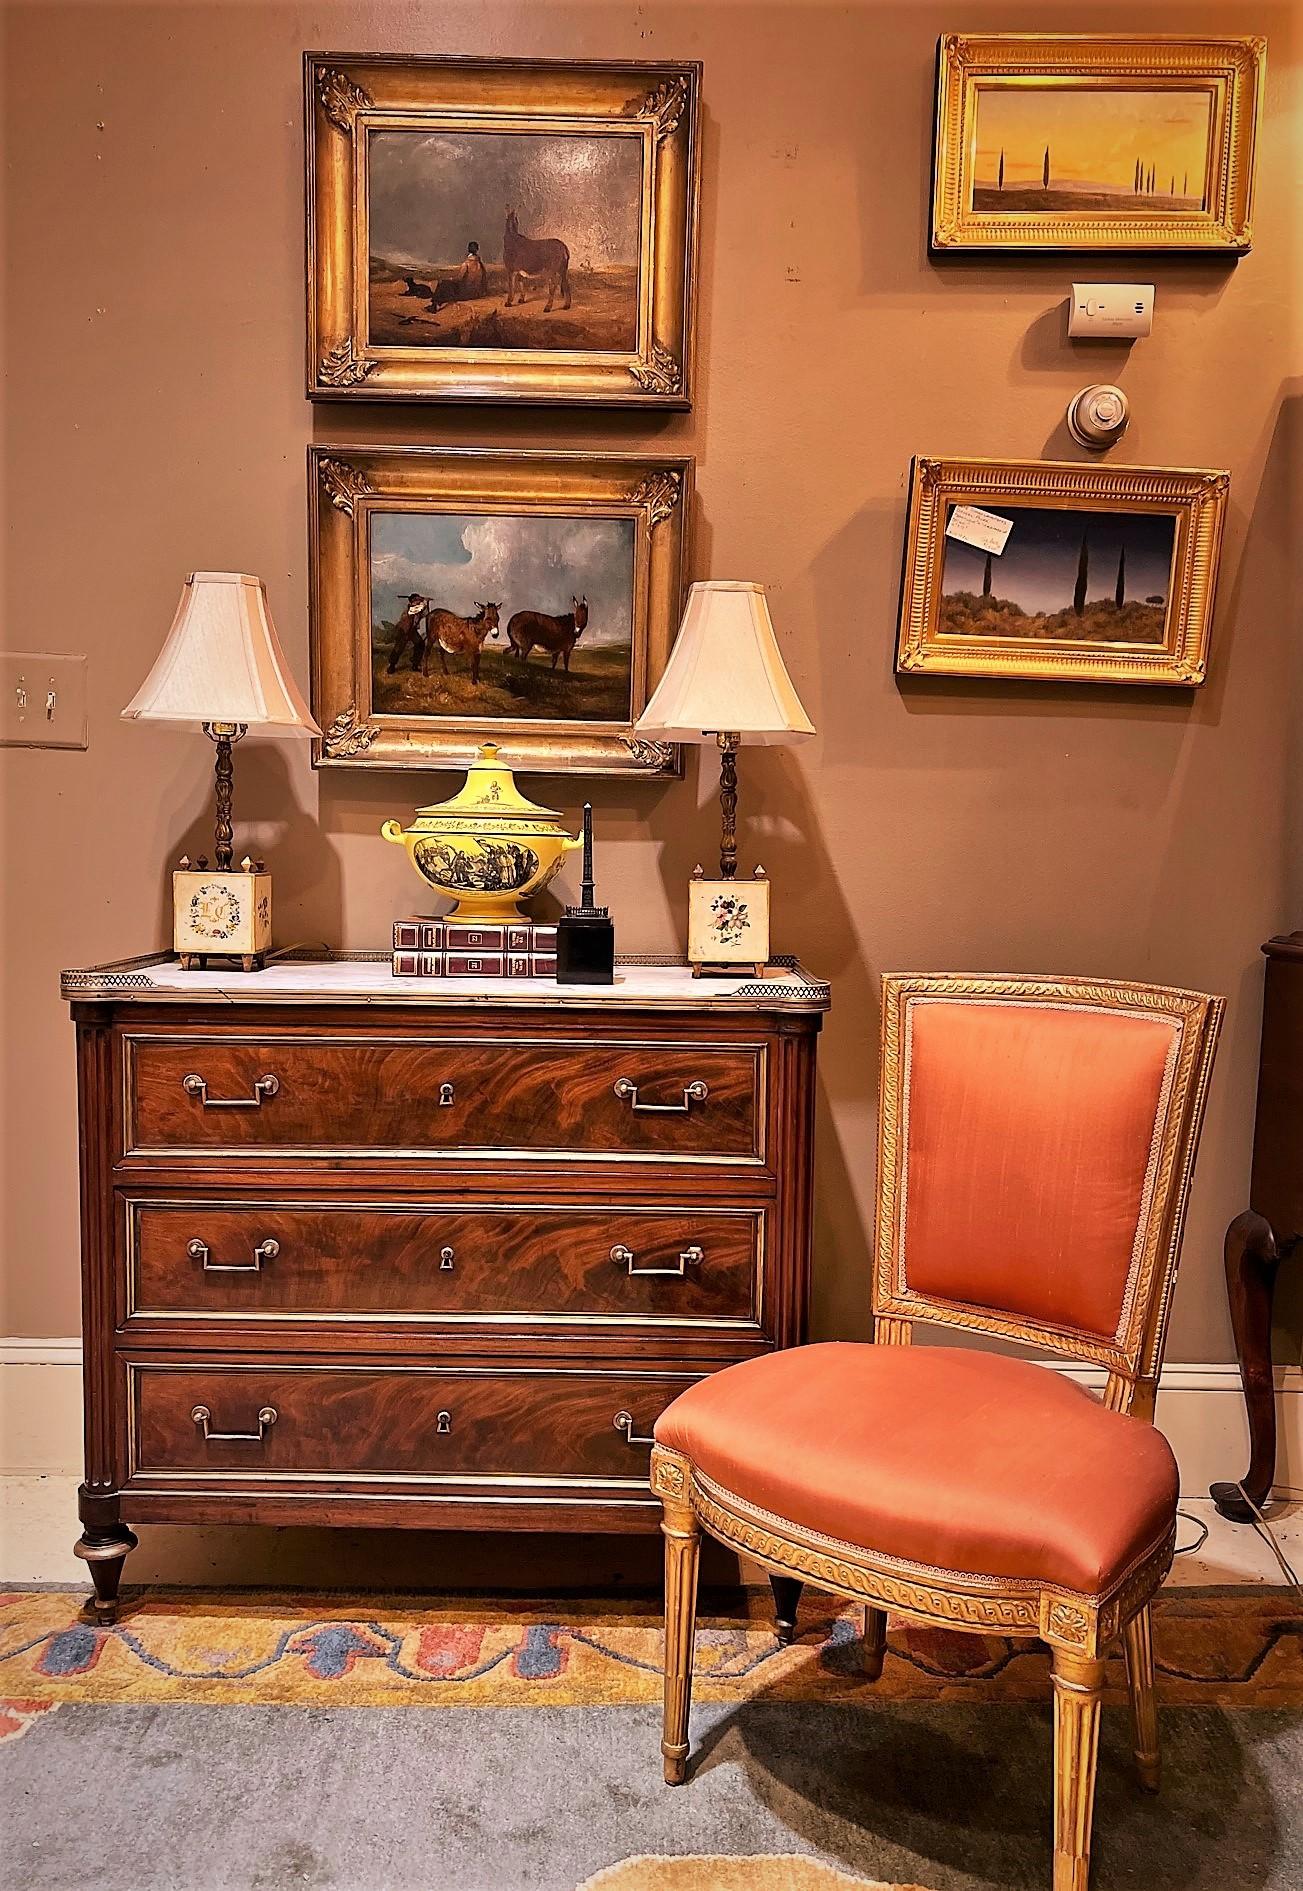 This beautiful and stylish smaller 3-drawer commode is perfect for that focal point in the living room, dining area or foyer. It is hand-constructed of figured mahogany with oak secondary wood. Hand-cast bronze pulls, mounts, and distinctive pierced